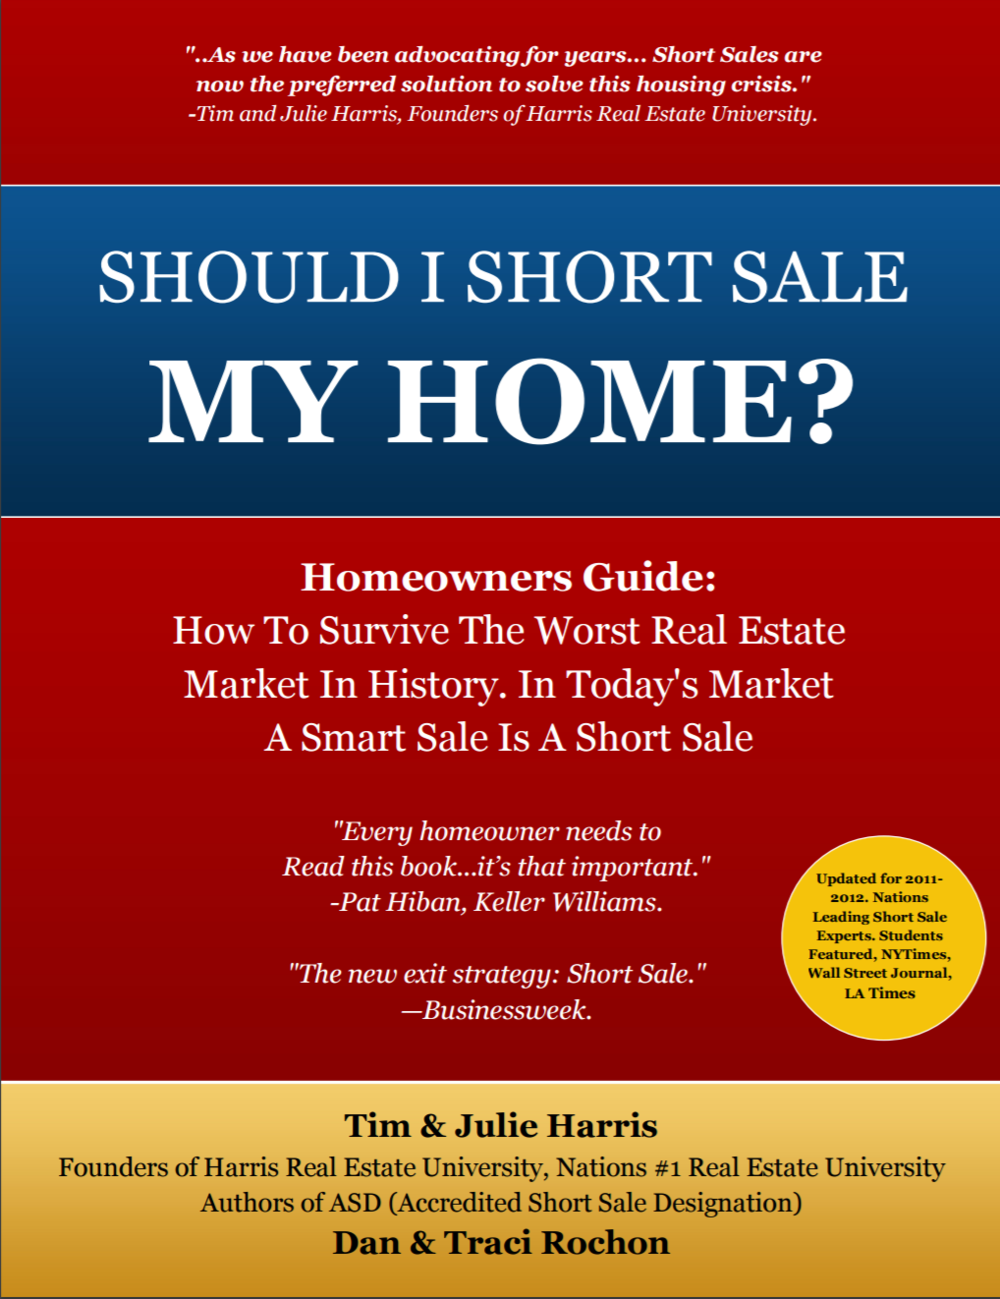 What Does Buying A Home After A Short Sale - Don't Believe The Naysayers Mean?